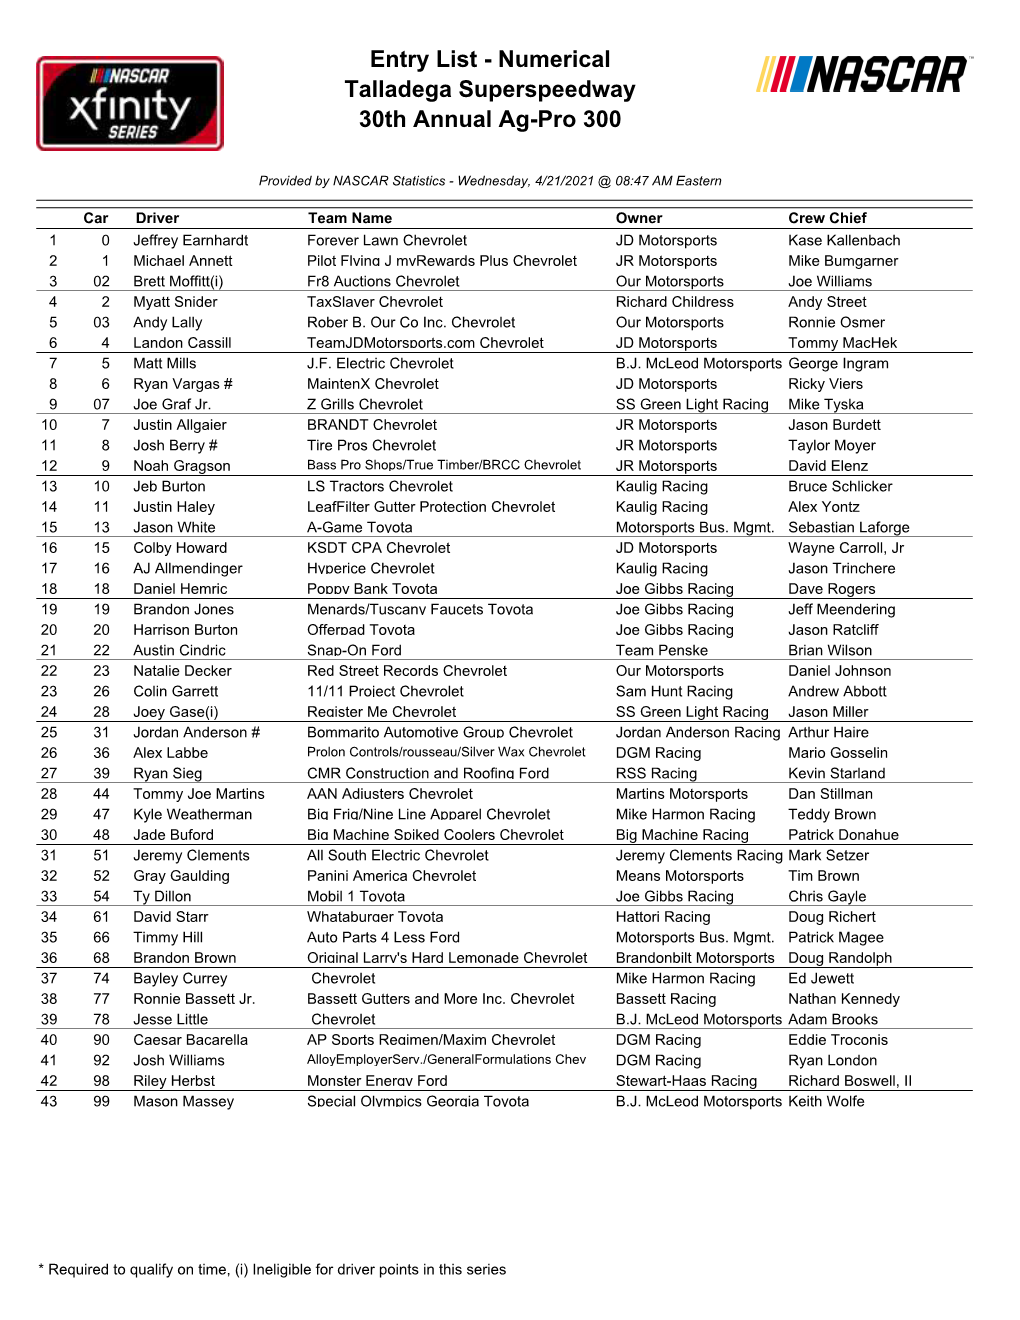 Entry List - Numerical Talladega Superspeedway 30Th Annual Ag-Pro 300